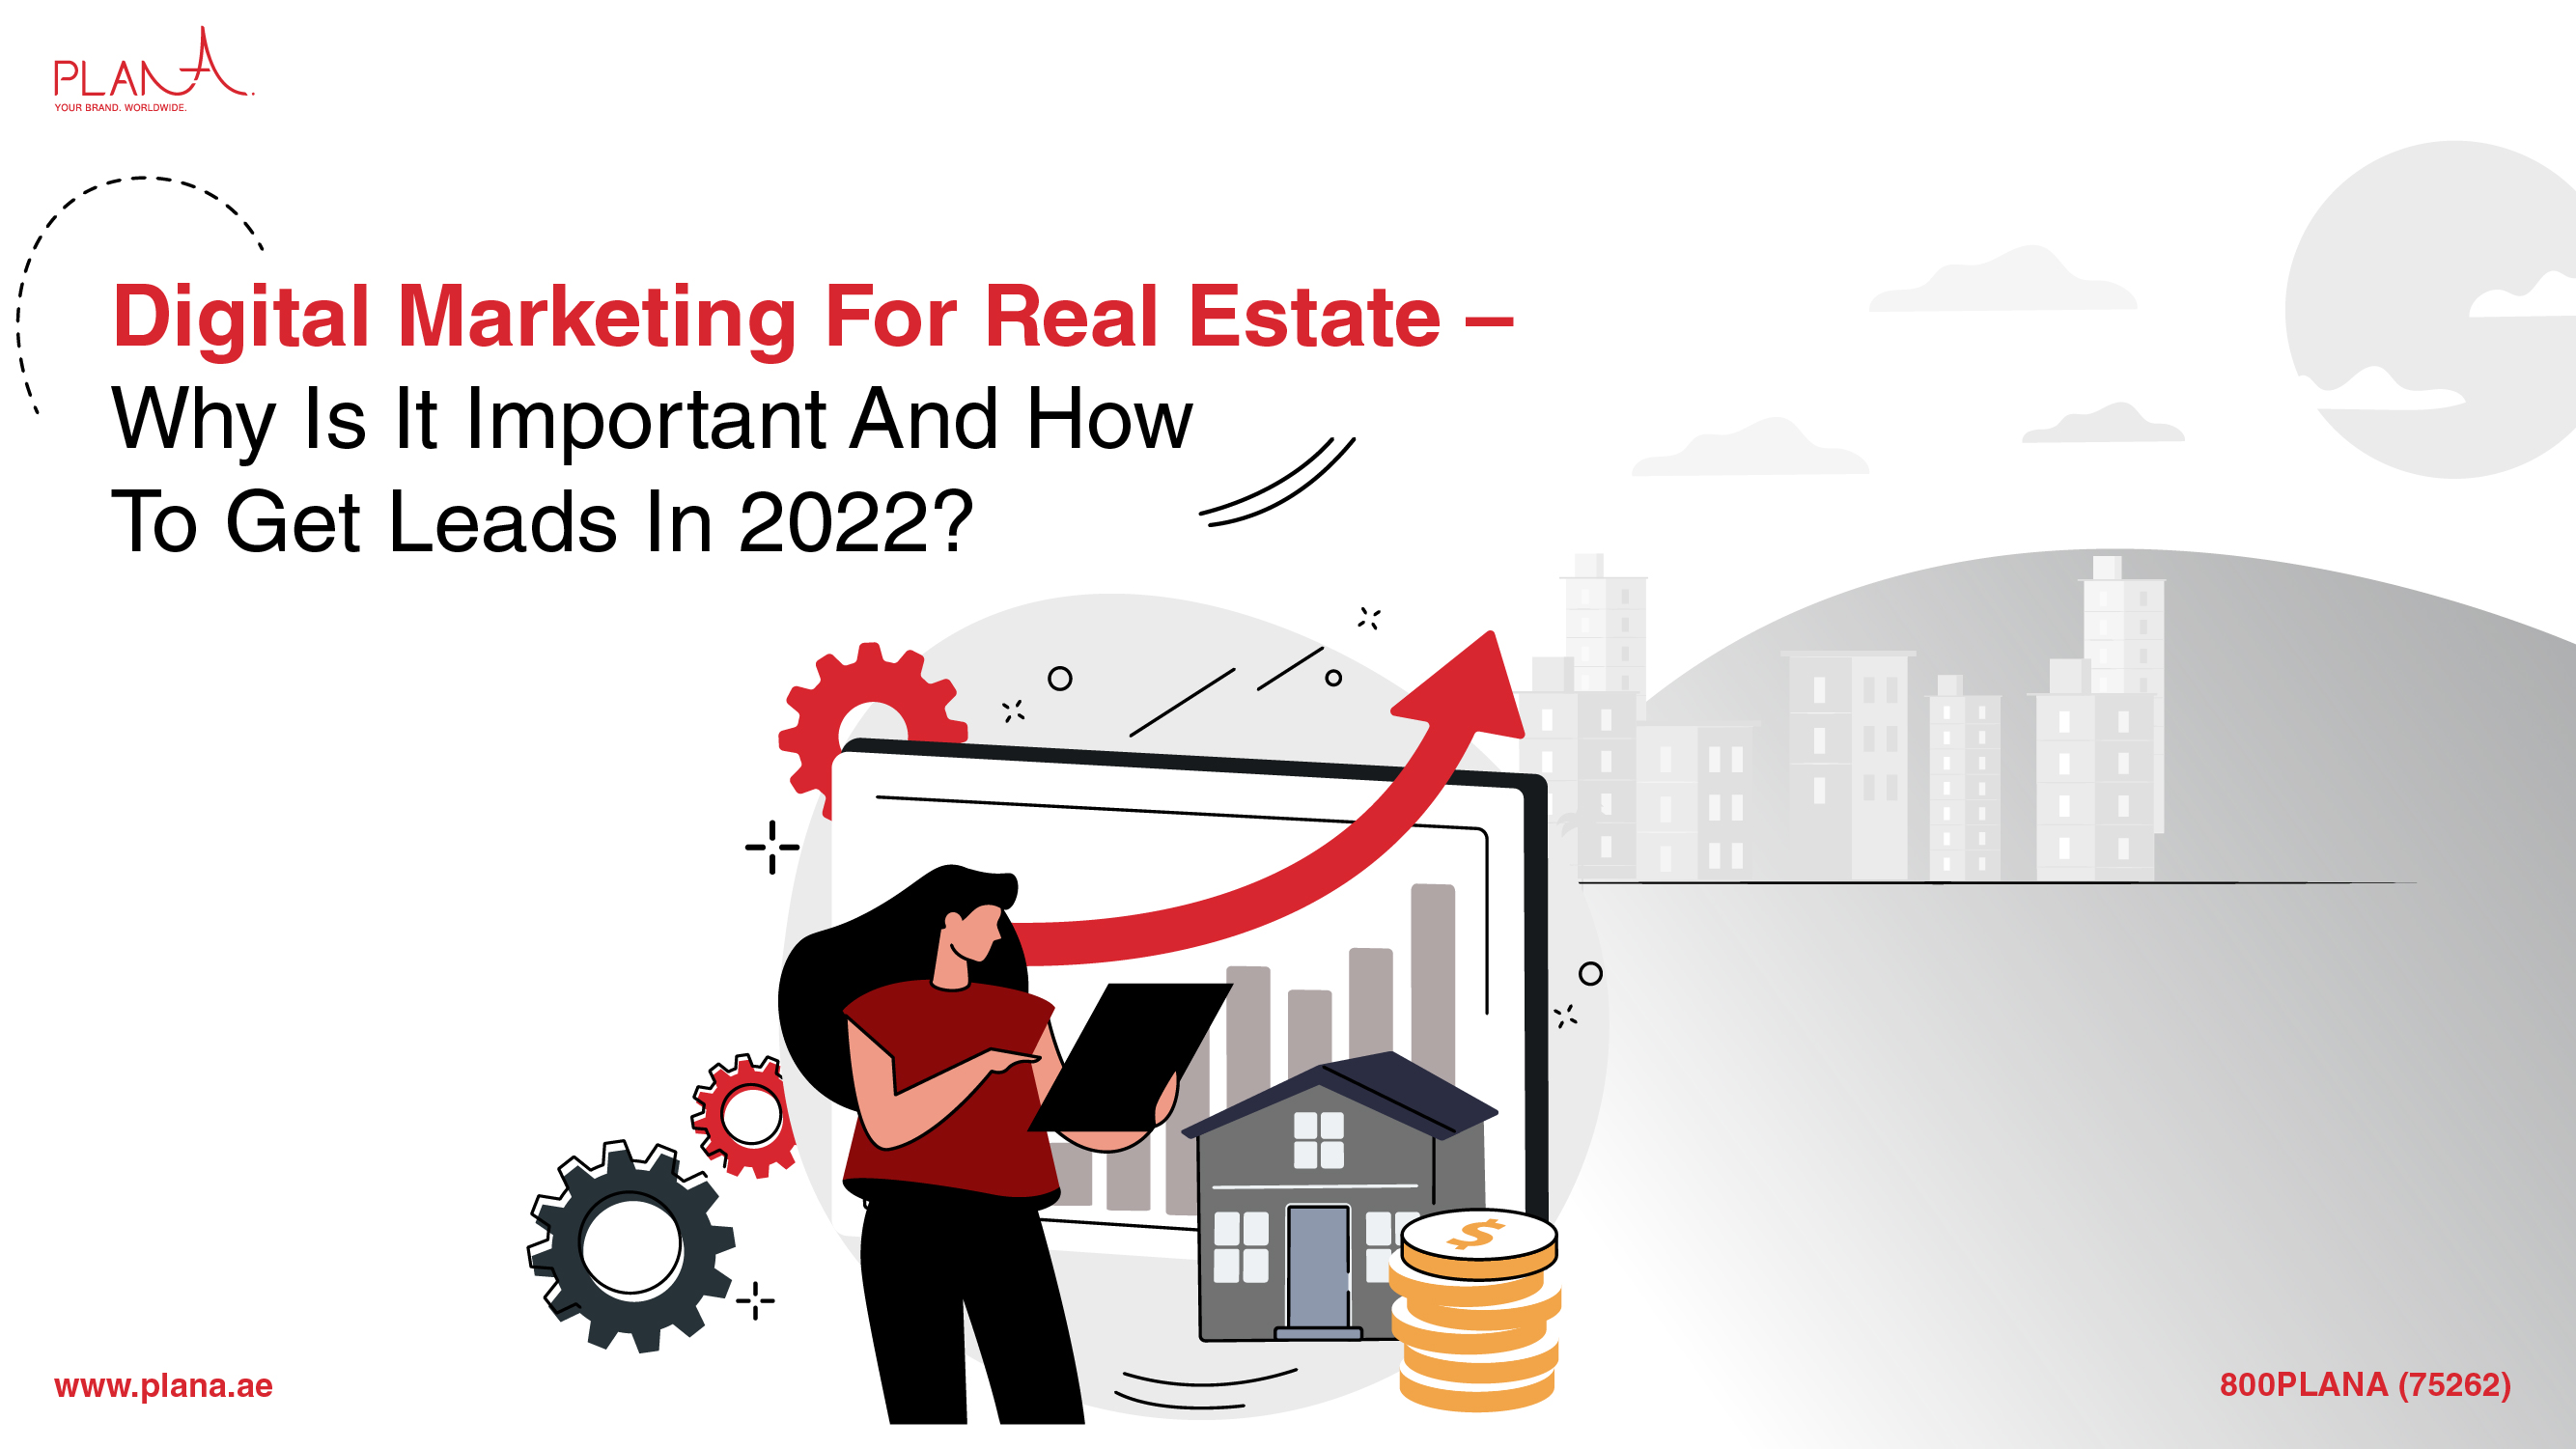 Digital Marketing For Real Estate Why Is It Important And How To Get Leads In 2022?